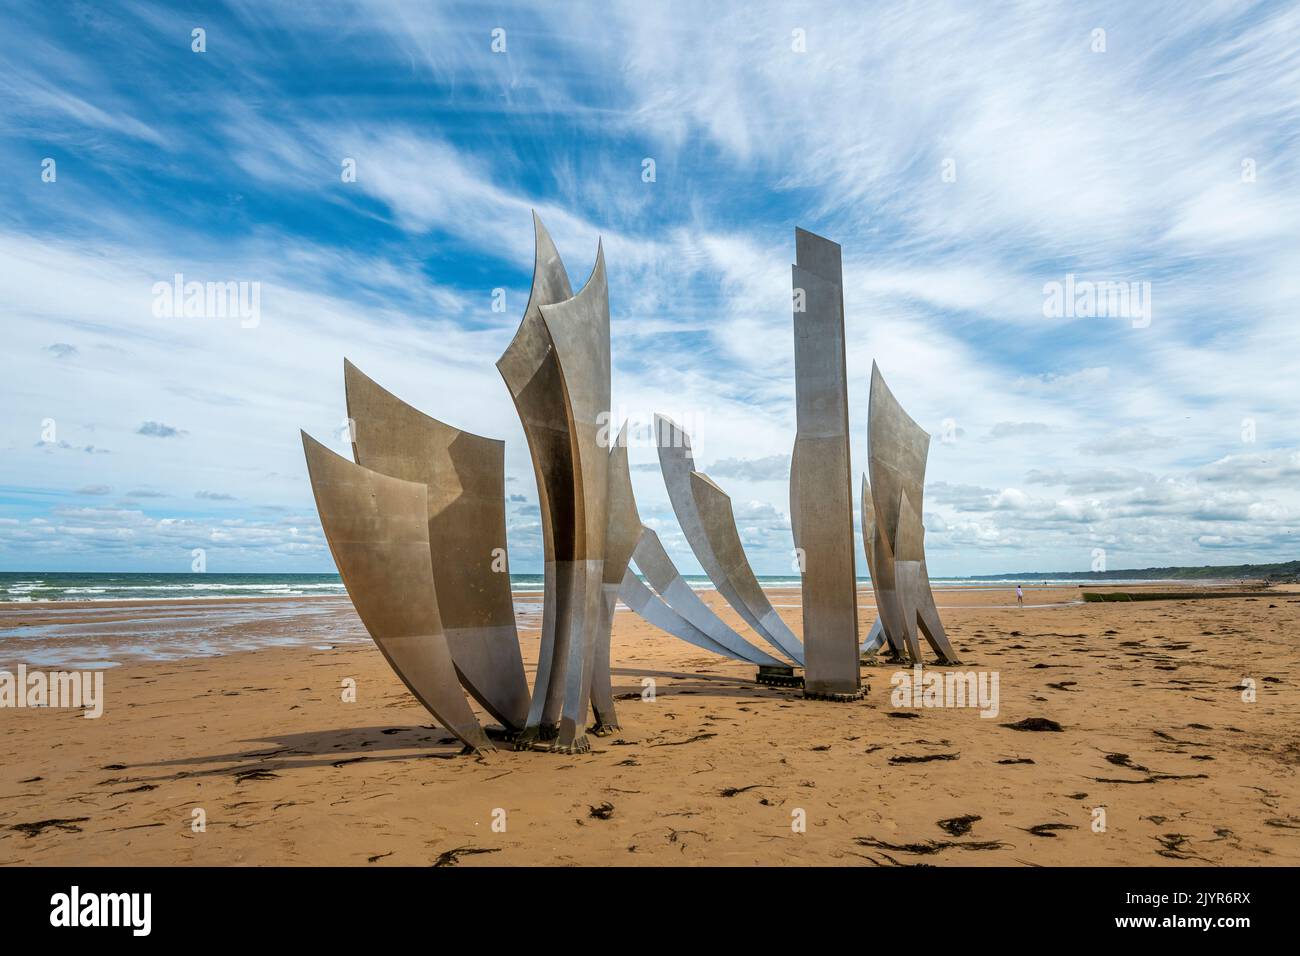 Les Braves de Saint-Laurent-sur-Mer monument. Erected on the sand of Omaha Beach, in homage to the 35,000 allied soldiers who landed there on 6 June 1944, and to the 3,000 victims, dead, missing and wounded on the evening of D-Day, the 'Les Braves' monument, the work of the sculptor Anilore Banon, whose steel sails stand at the foot of the steps of the Signal monument in Saint-Laurent-sur-Mer, was inaugurated on 5 June 2004, on the eve of the 60th anniversary of the Normandy landings. Calvados, Normandy, France Stock Photo